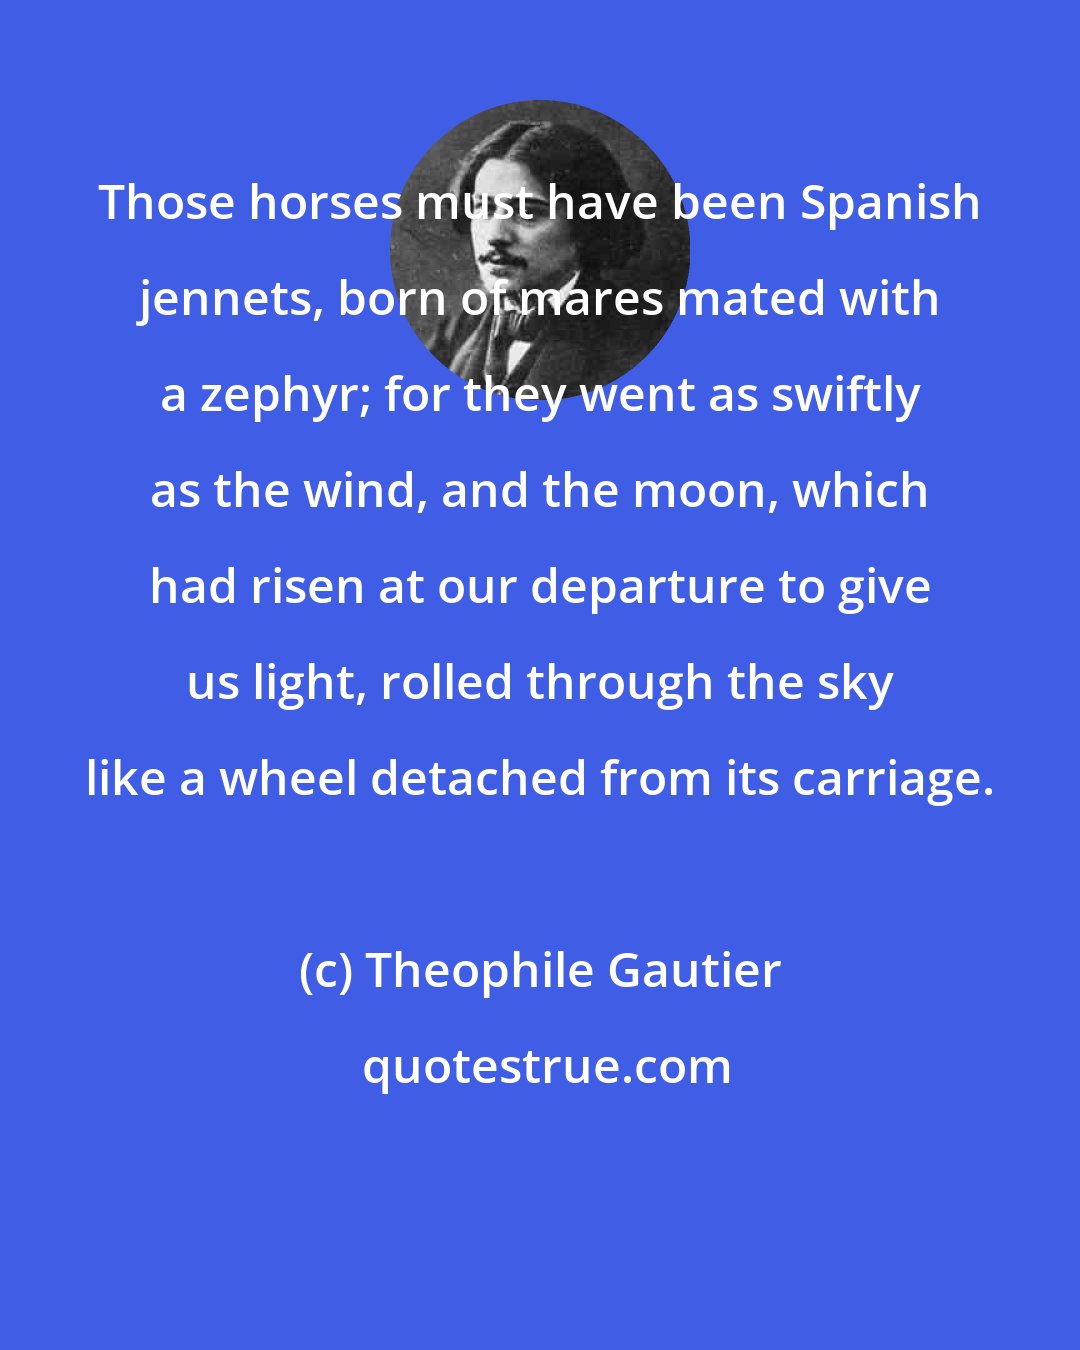 Theophile Gautier: Those horses must have been Spanish jennets, born of mares mated with a zephyr; for they went as swiftly as the wind, and the moon, which had risen at our departure to give us light, rolled through the sky like a wheel detached from its carriage.